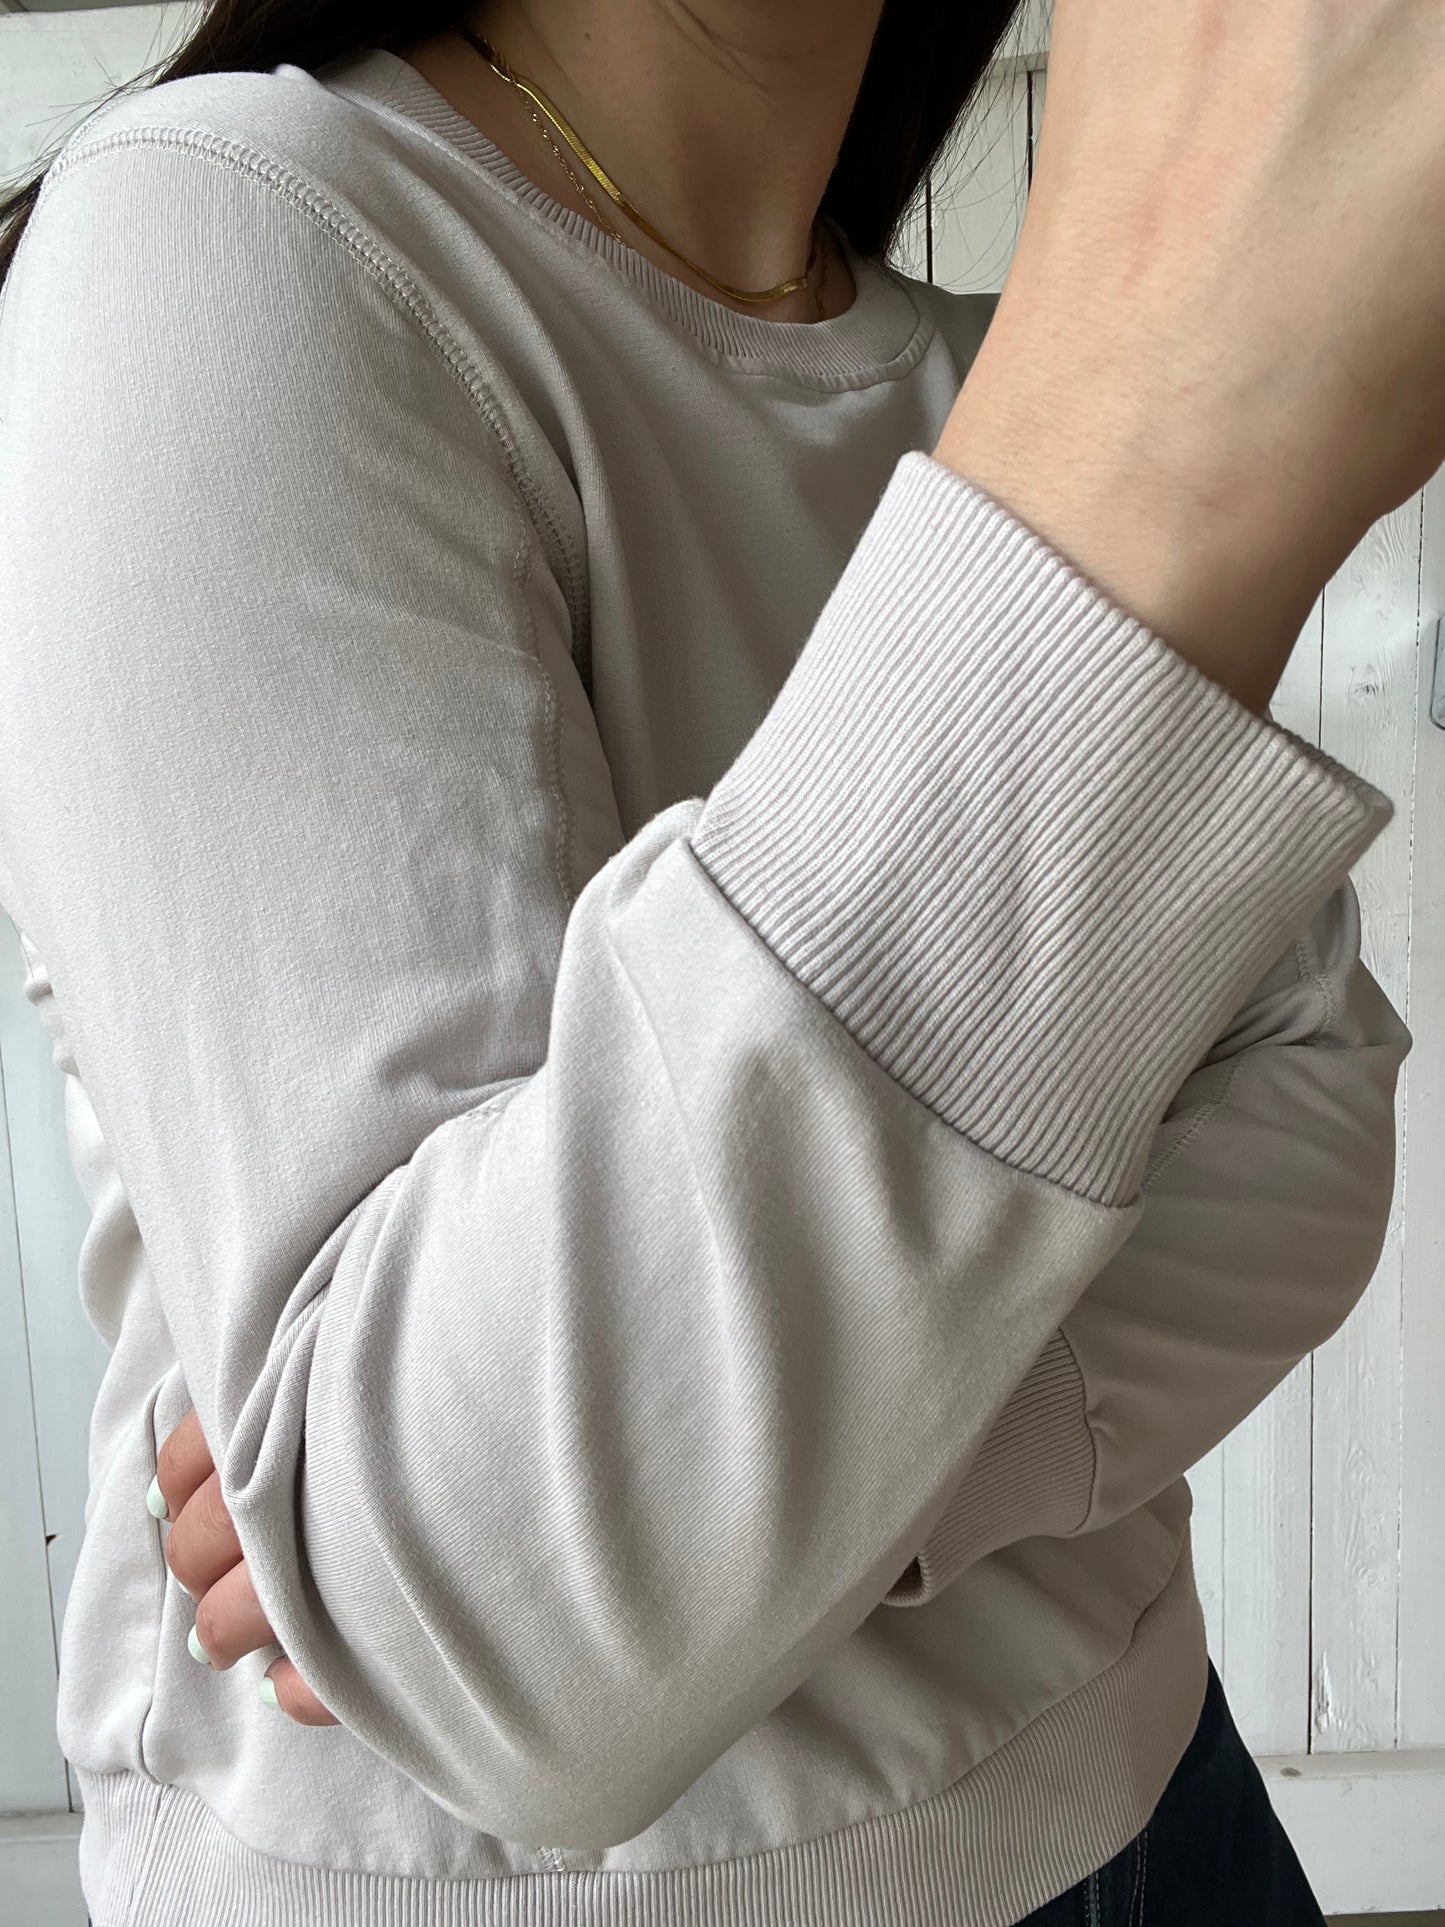 French Terry Luxe Sweatshirt - Size S